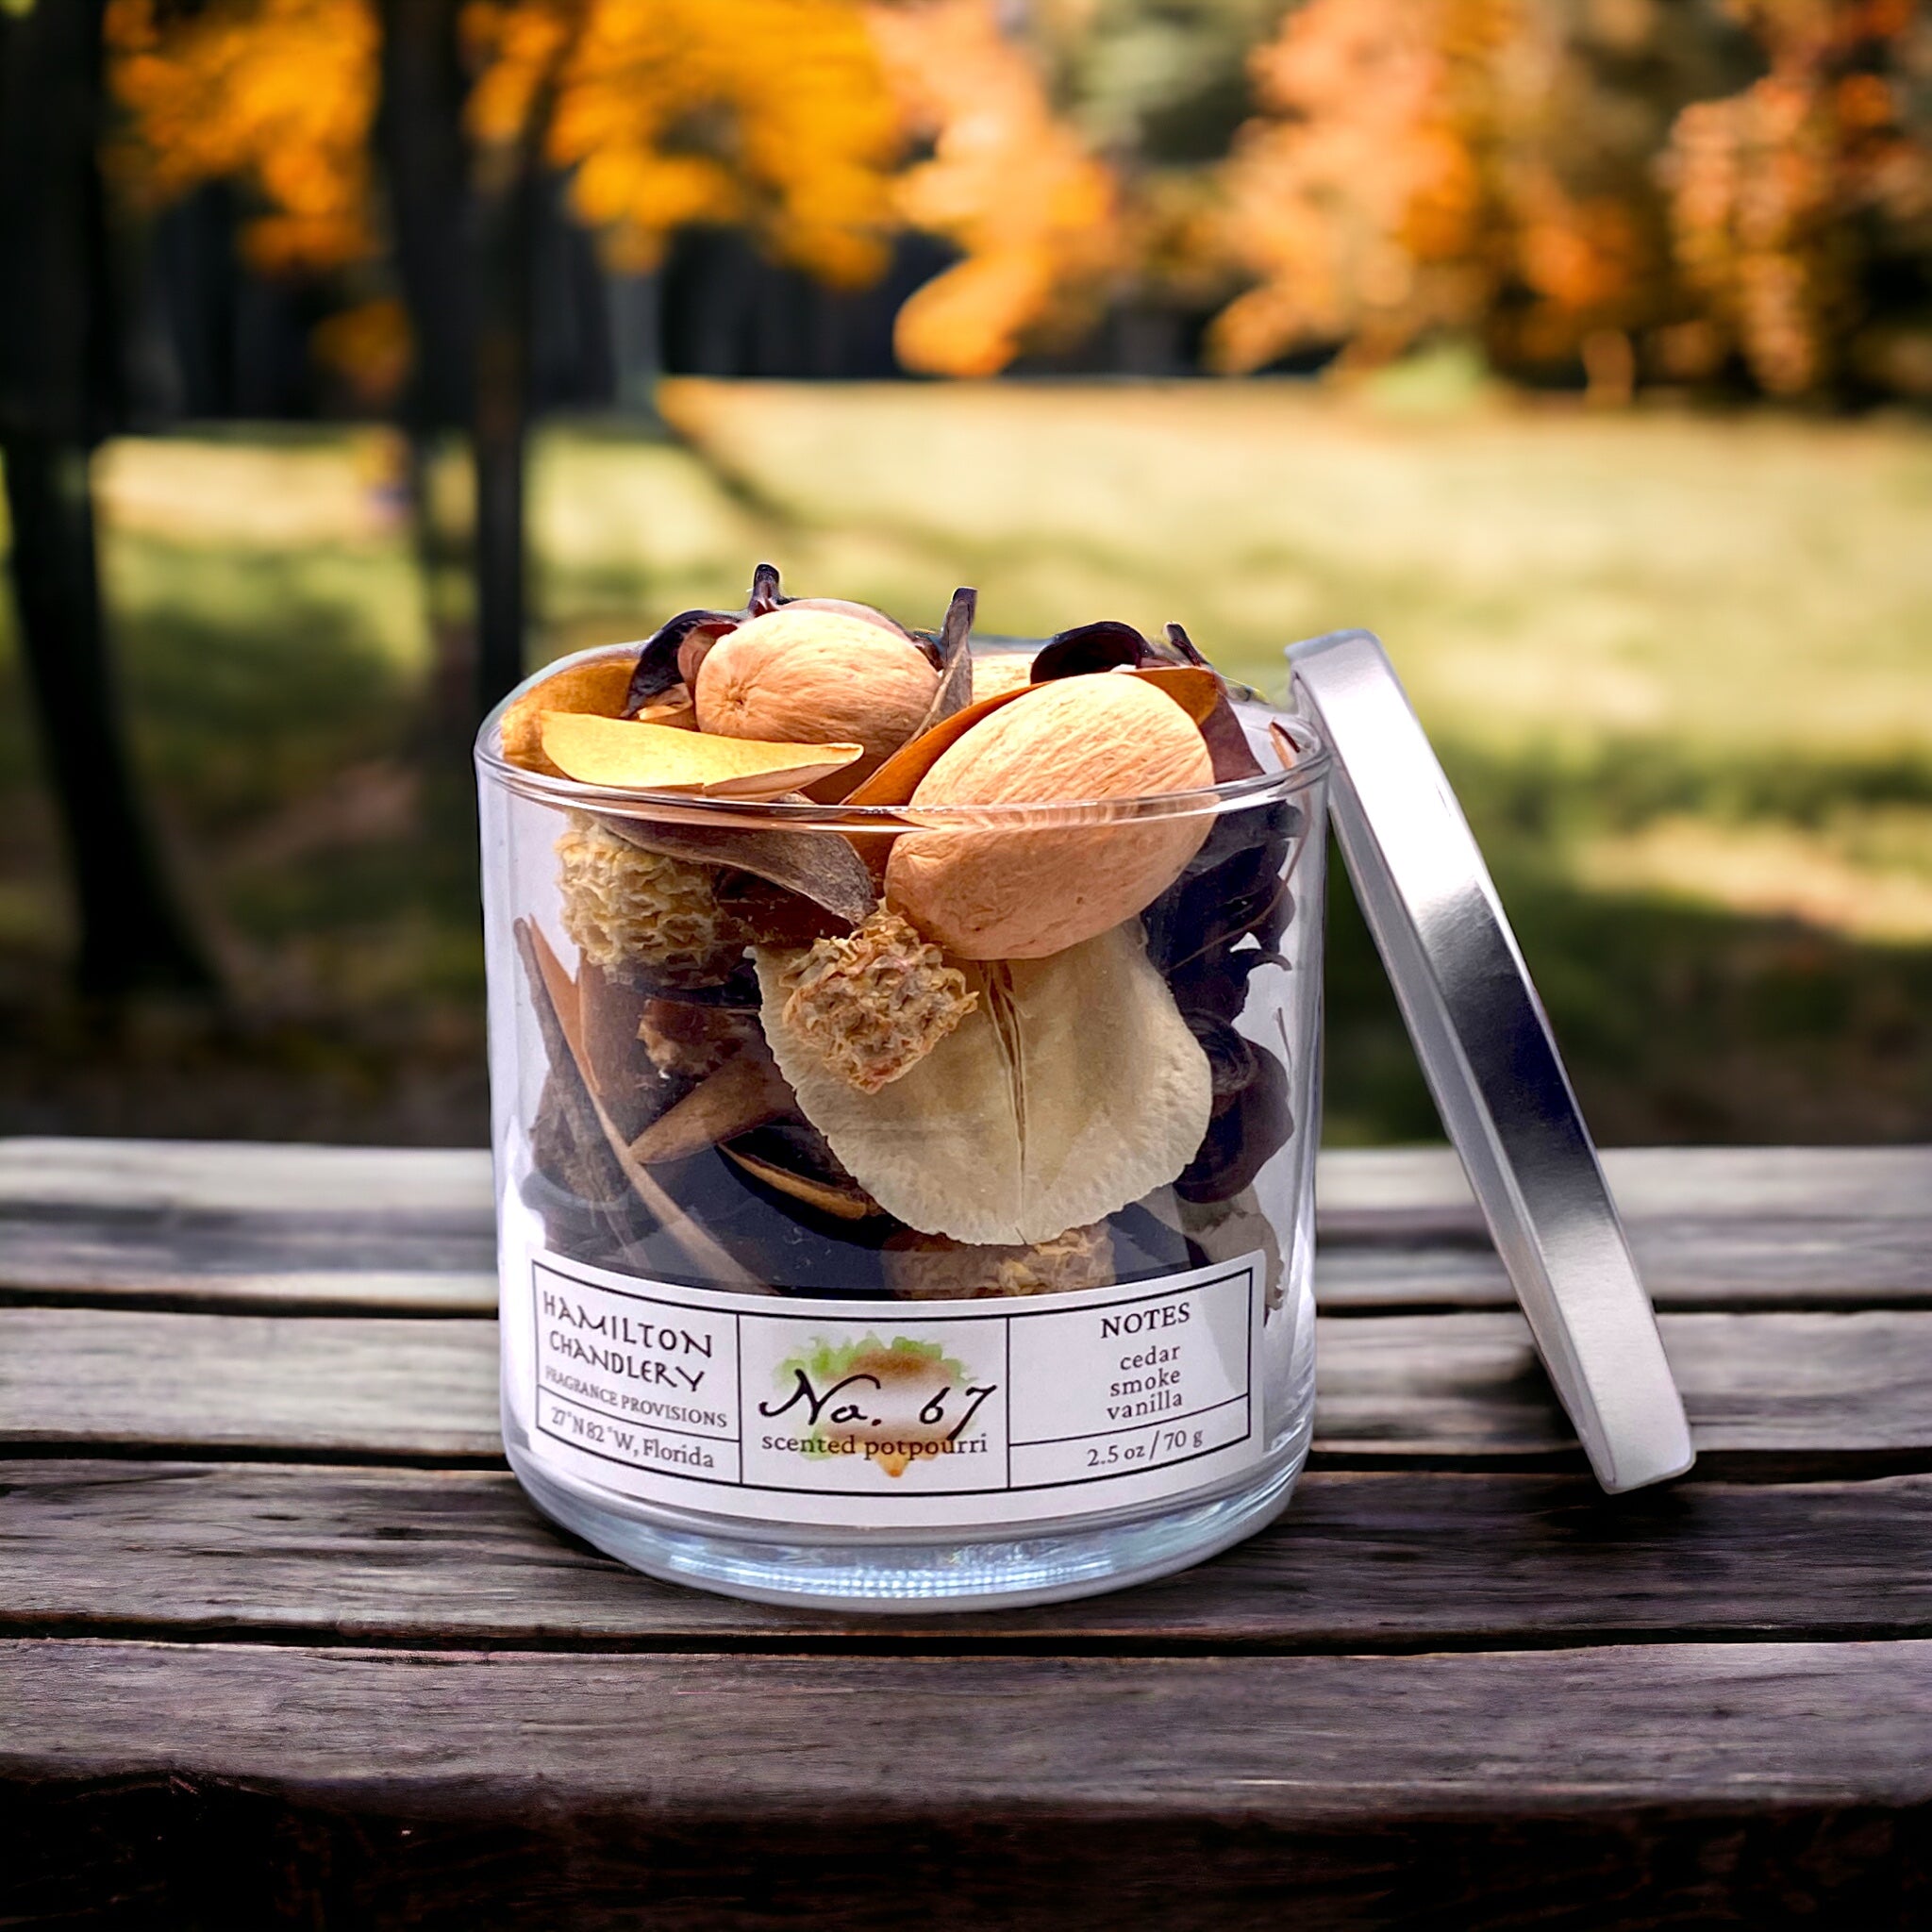 Fragrance No. 67 Potpourri Jar on Wooden Bench with Autumn Forest Background | Hamilton Chandlery